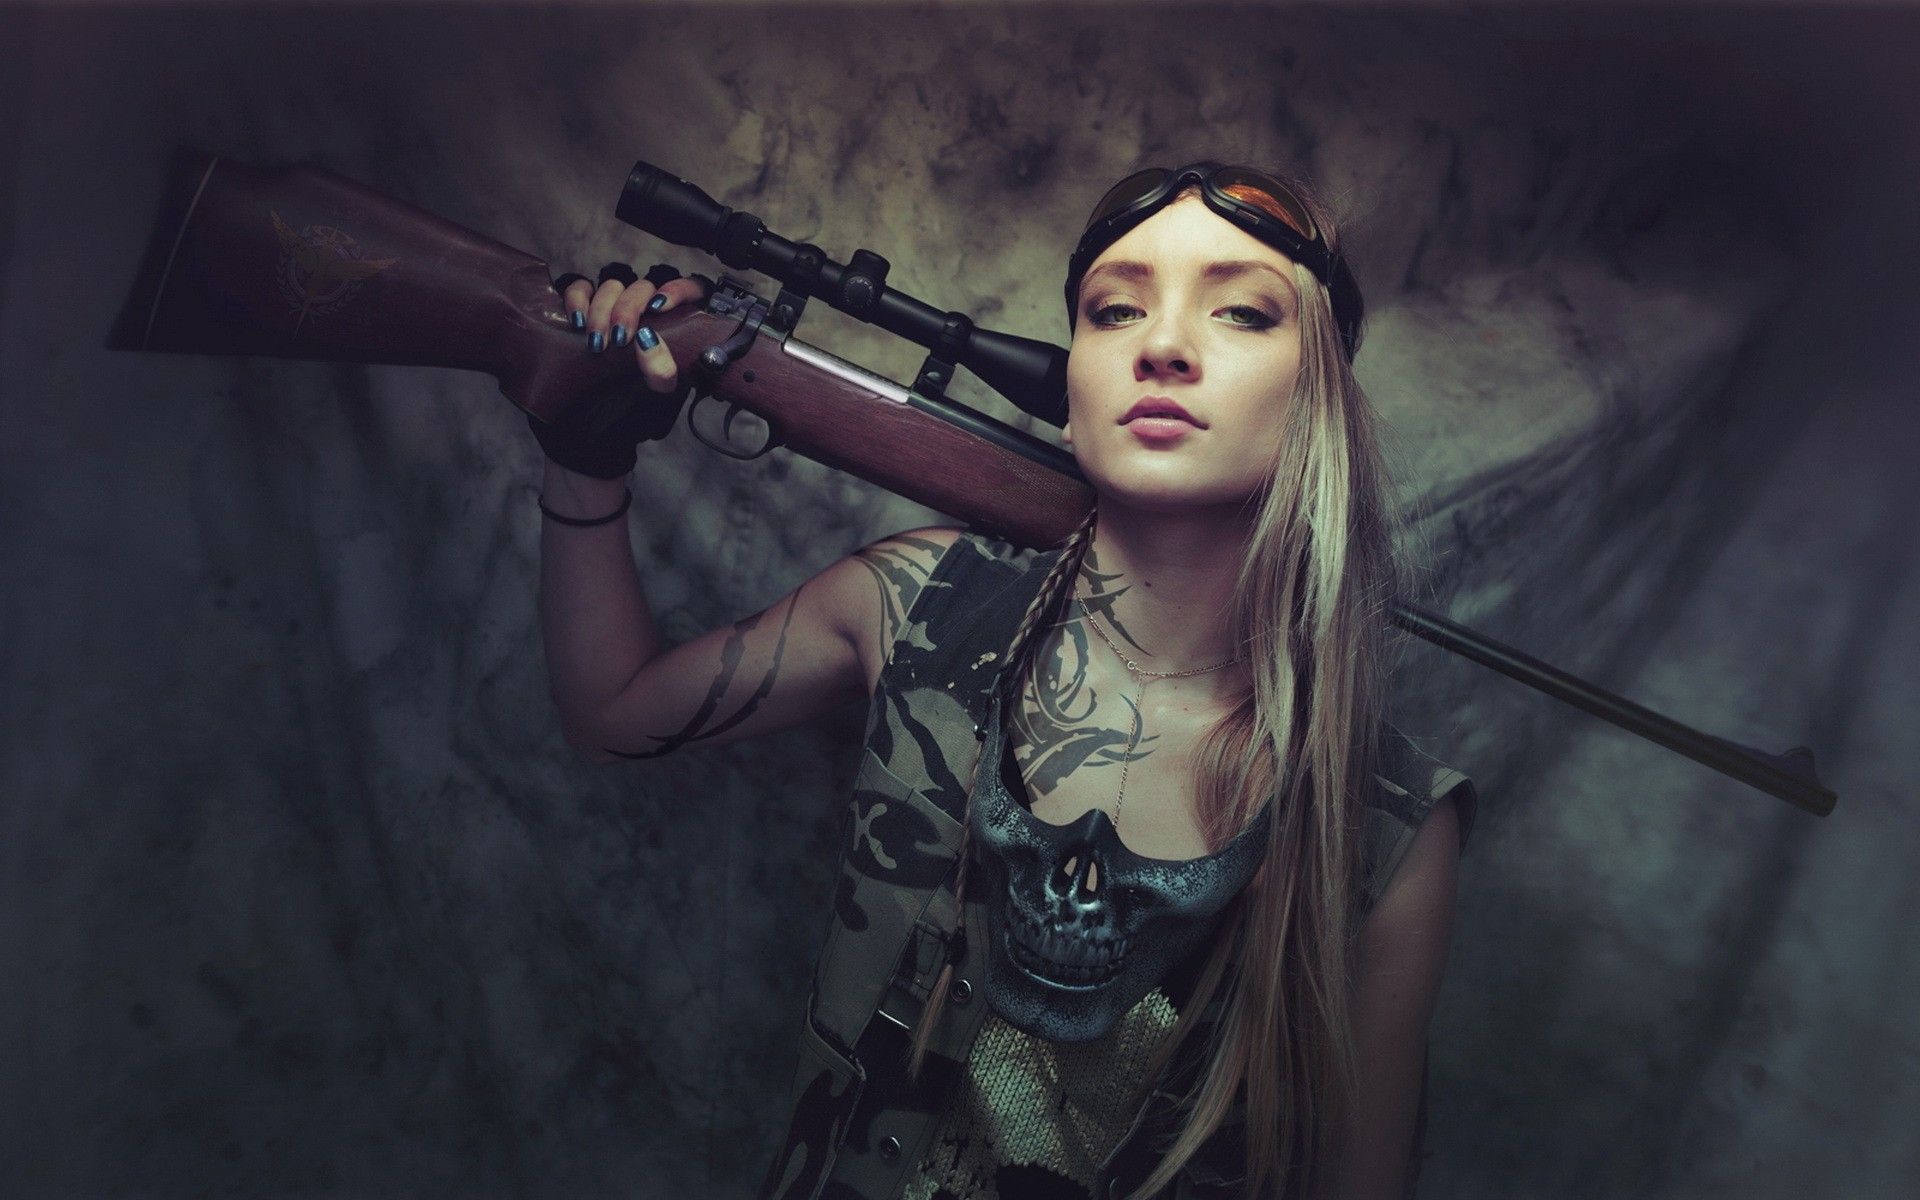 Women Army Gear Blonde Rifles Wallpaper and Free Stock